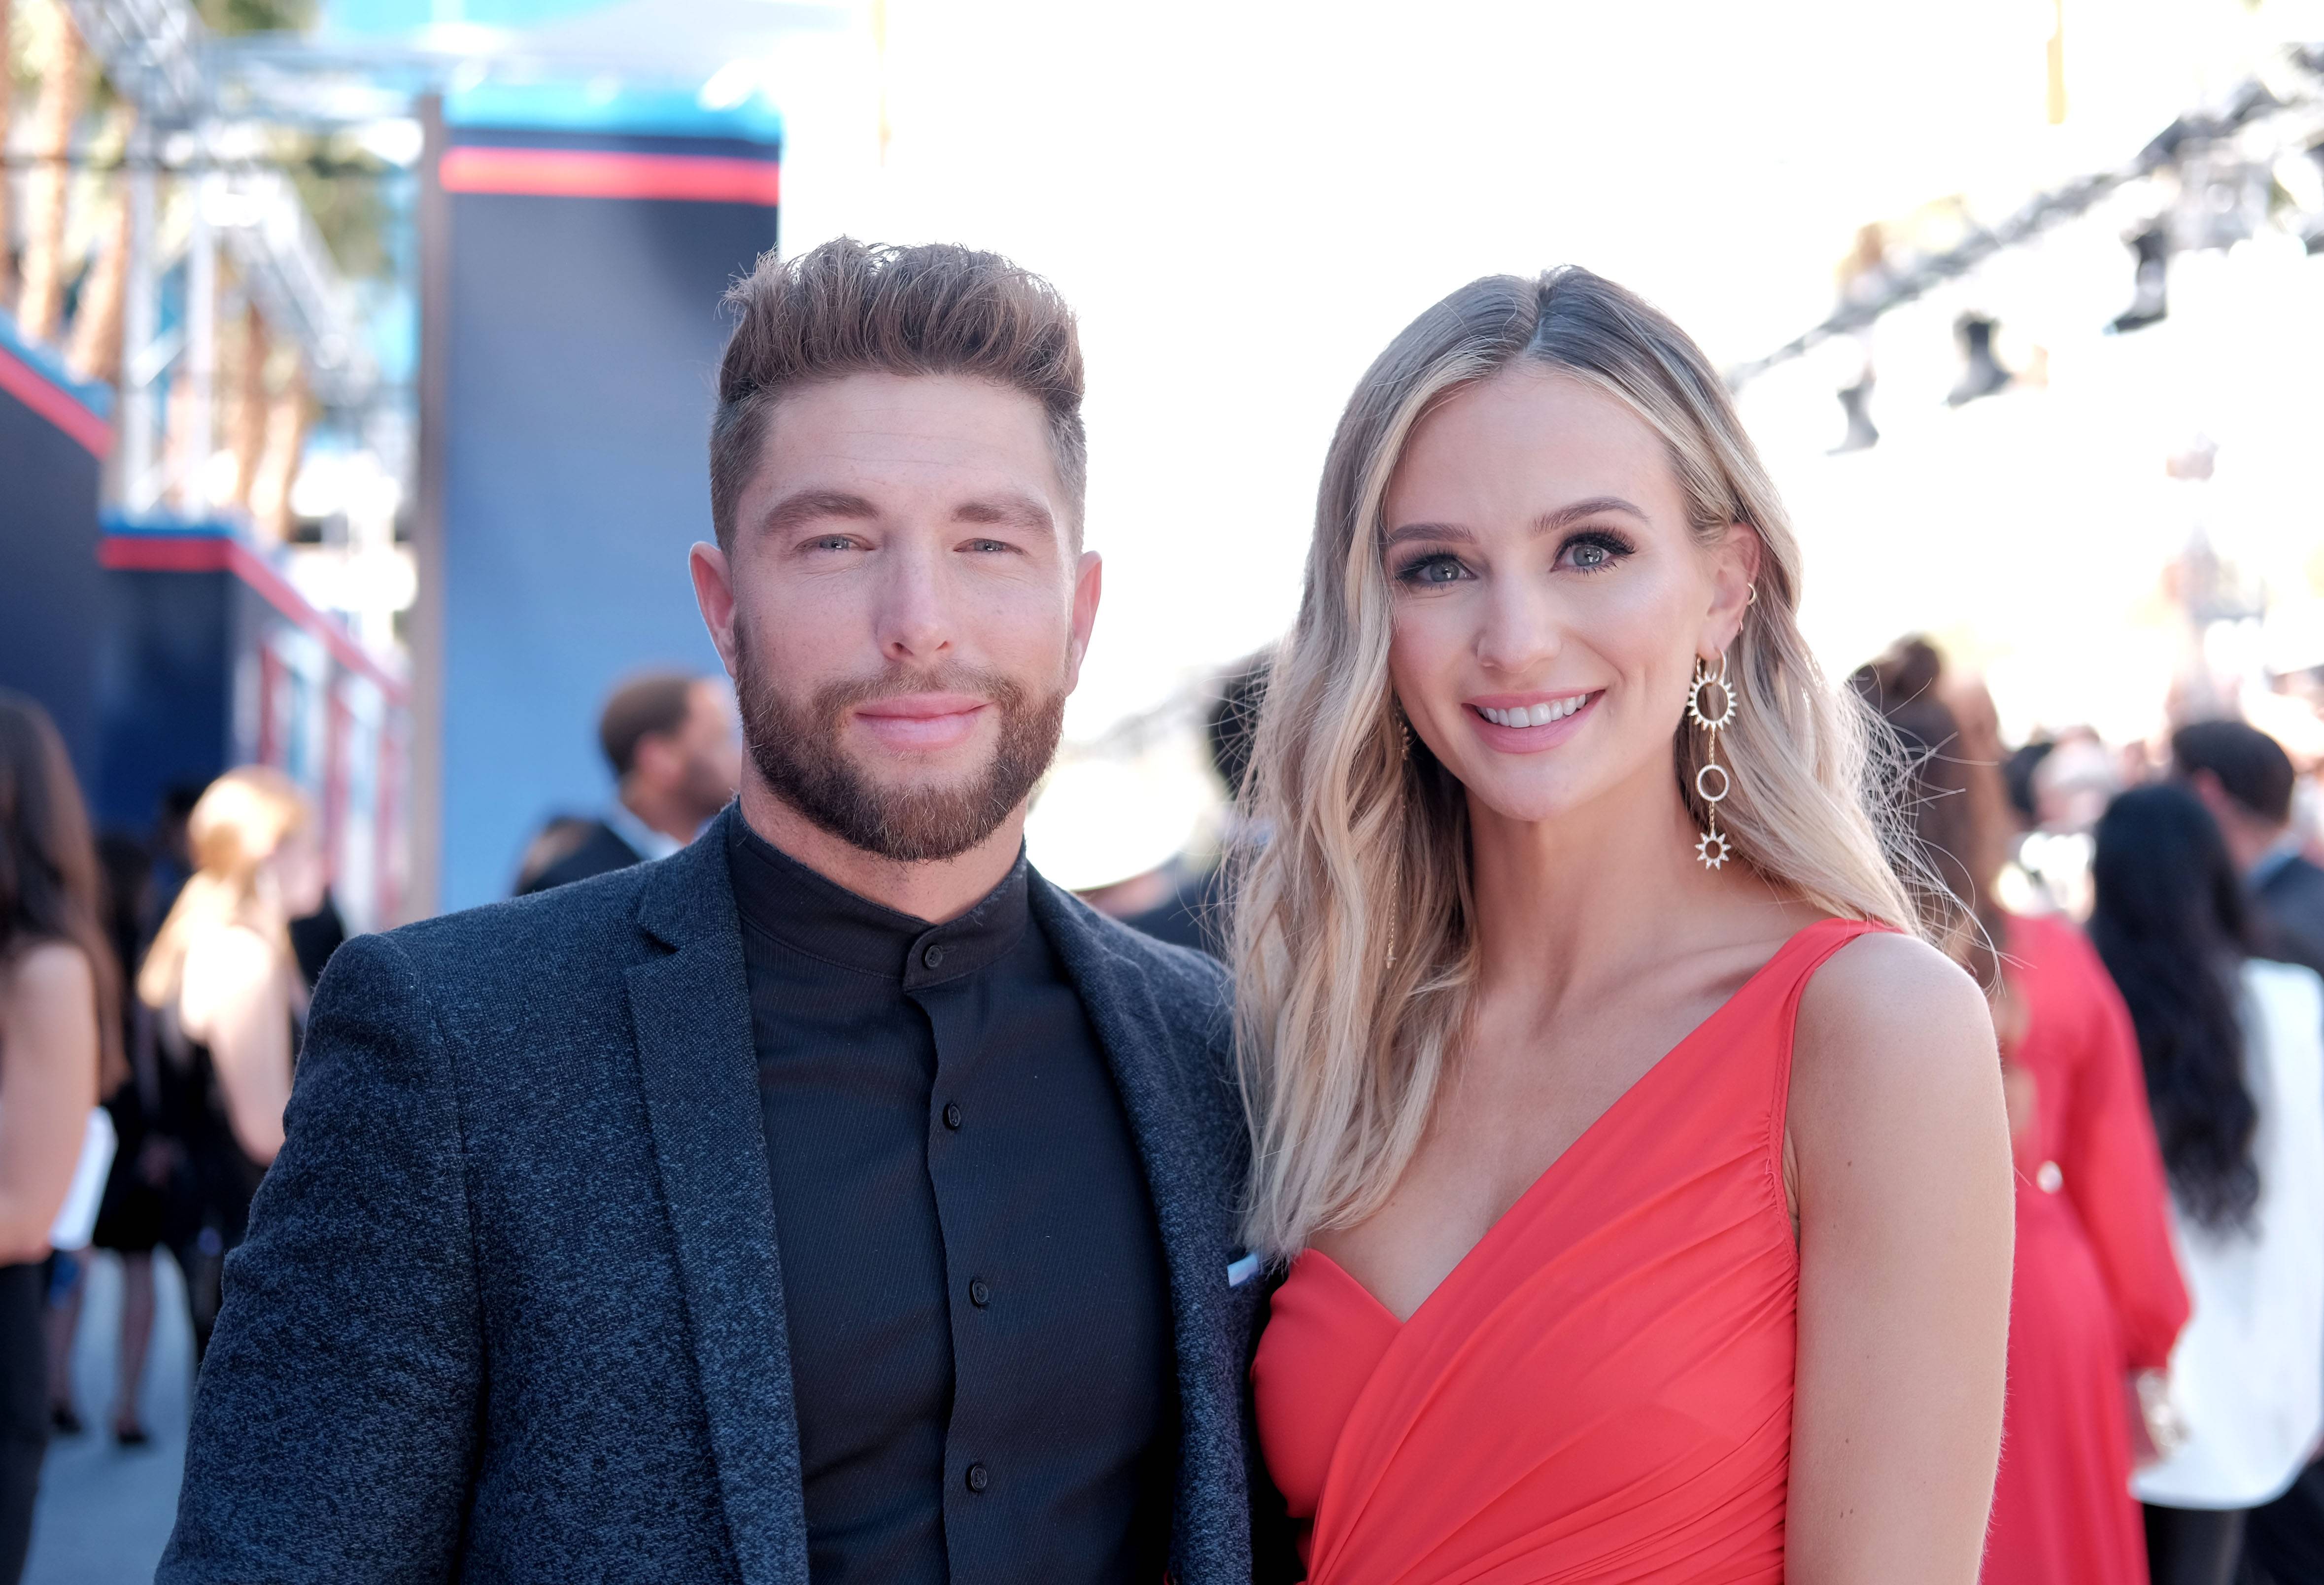 LAS VEGAS, NEVADA - APRIL 07: Lauren Bushnell and Chris Lane attend the 54th Academy Of Country Music Awards at MGM Grand Hotel & Casino on April 07, 2019 in Las Vegas, Nevada. 